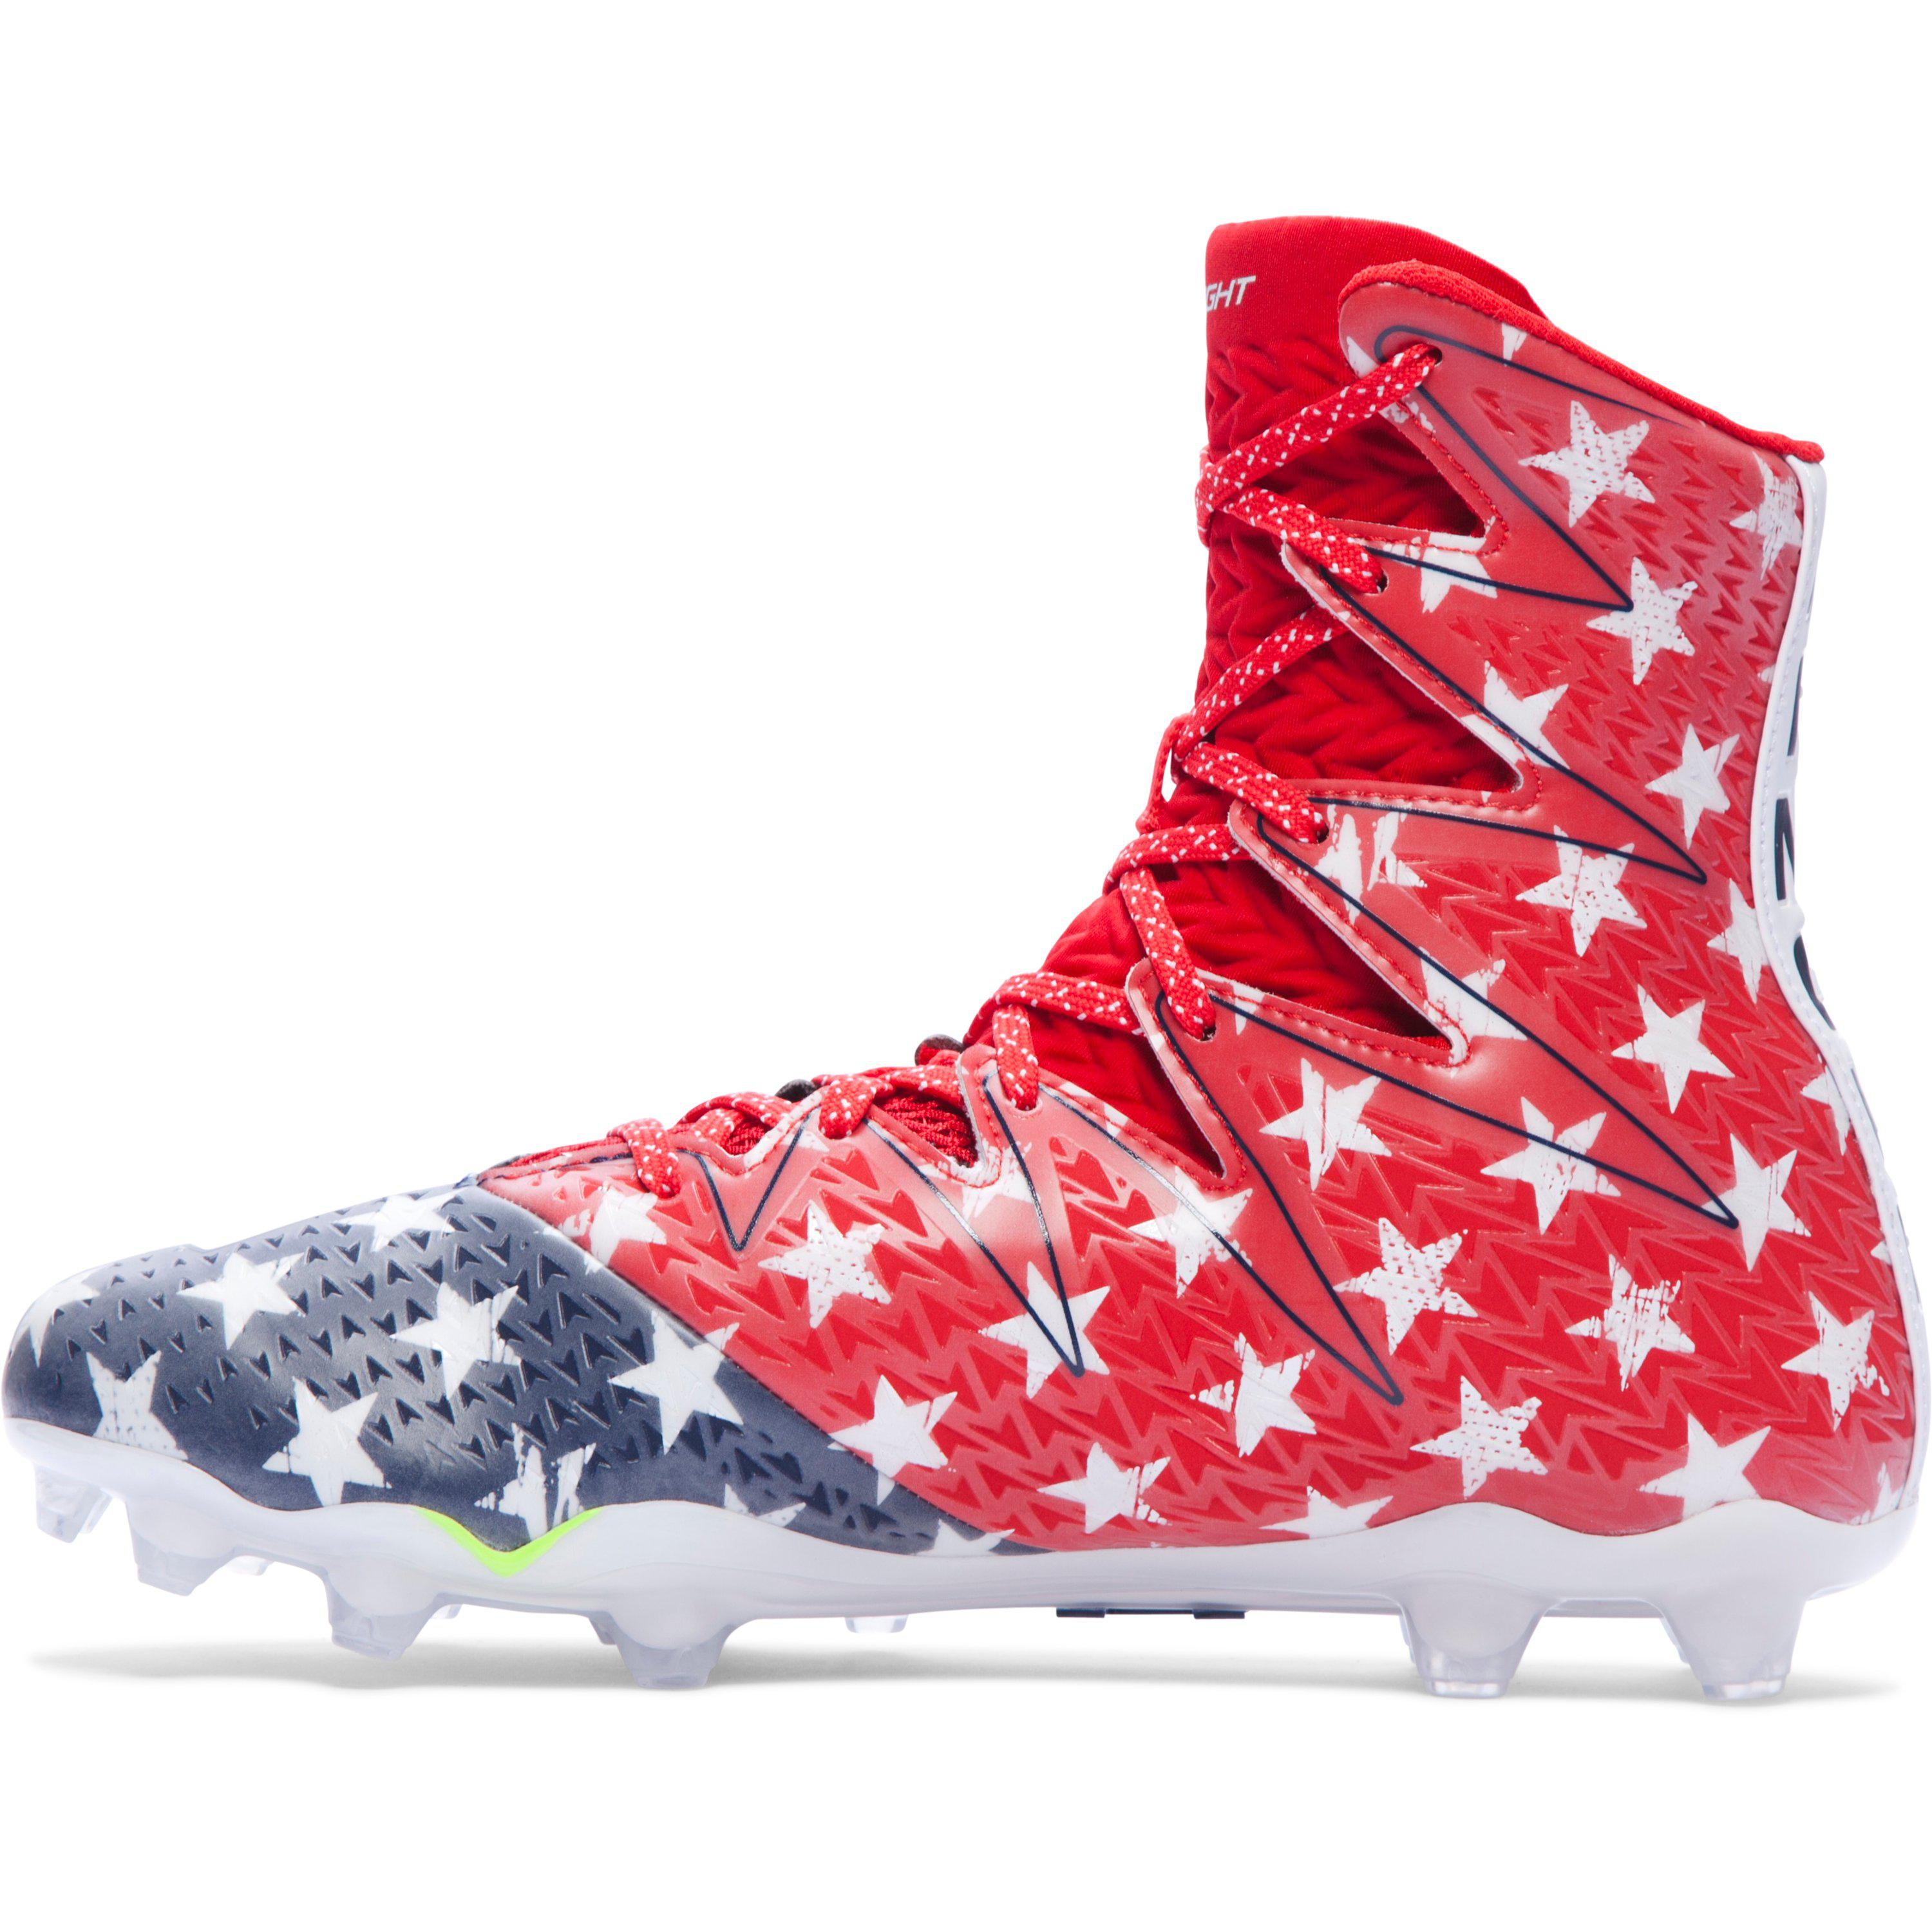 Under Armour Men's Ua Highlight Football Cleats – Limited Edition for Men -  Lyst